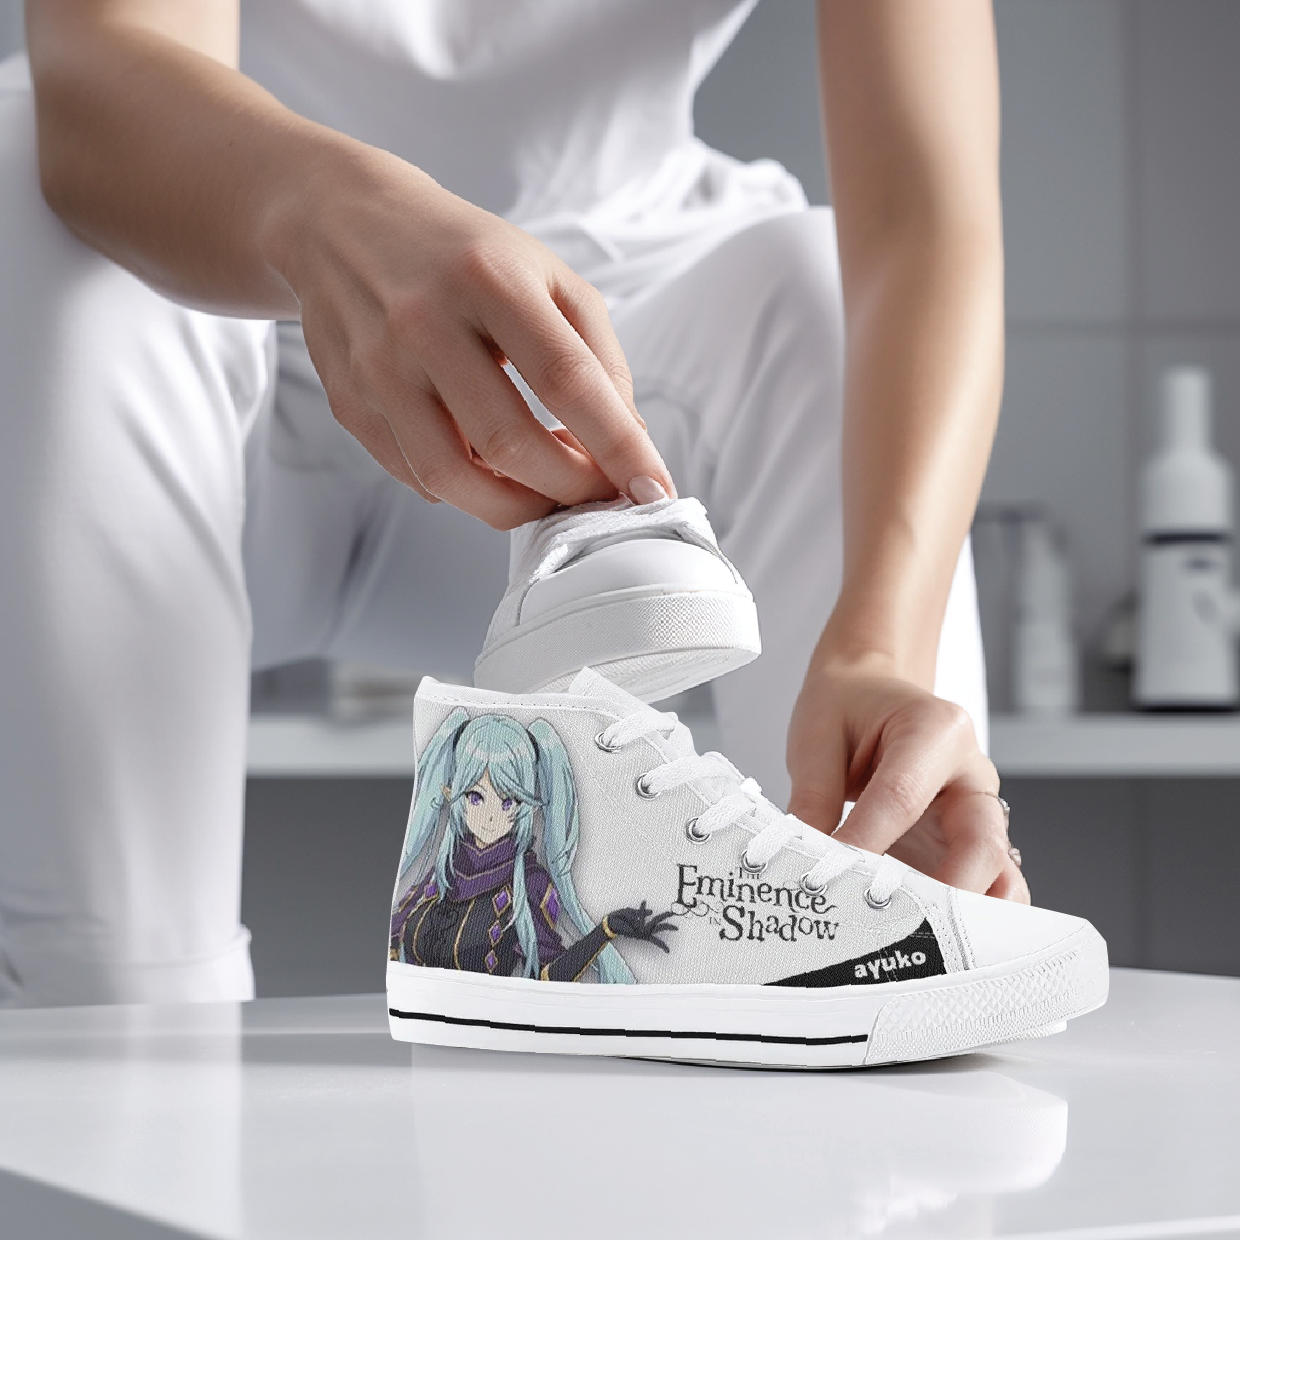 The Ultimate Guide to Caring for Your AyukoShop Anime Sneakers